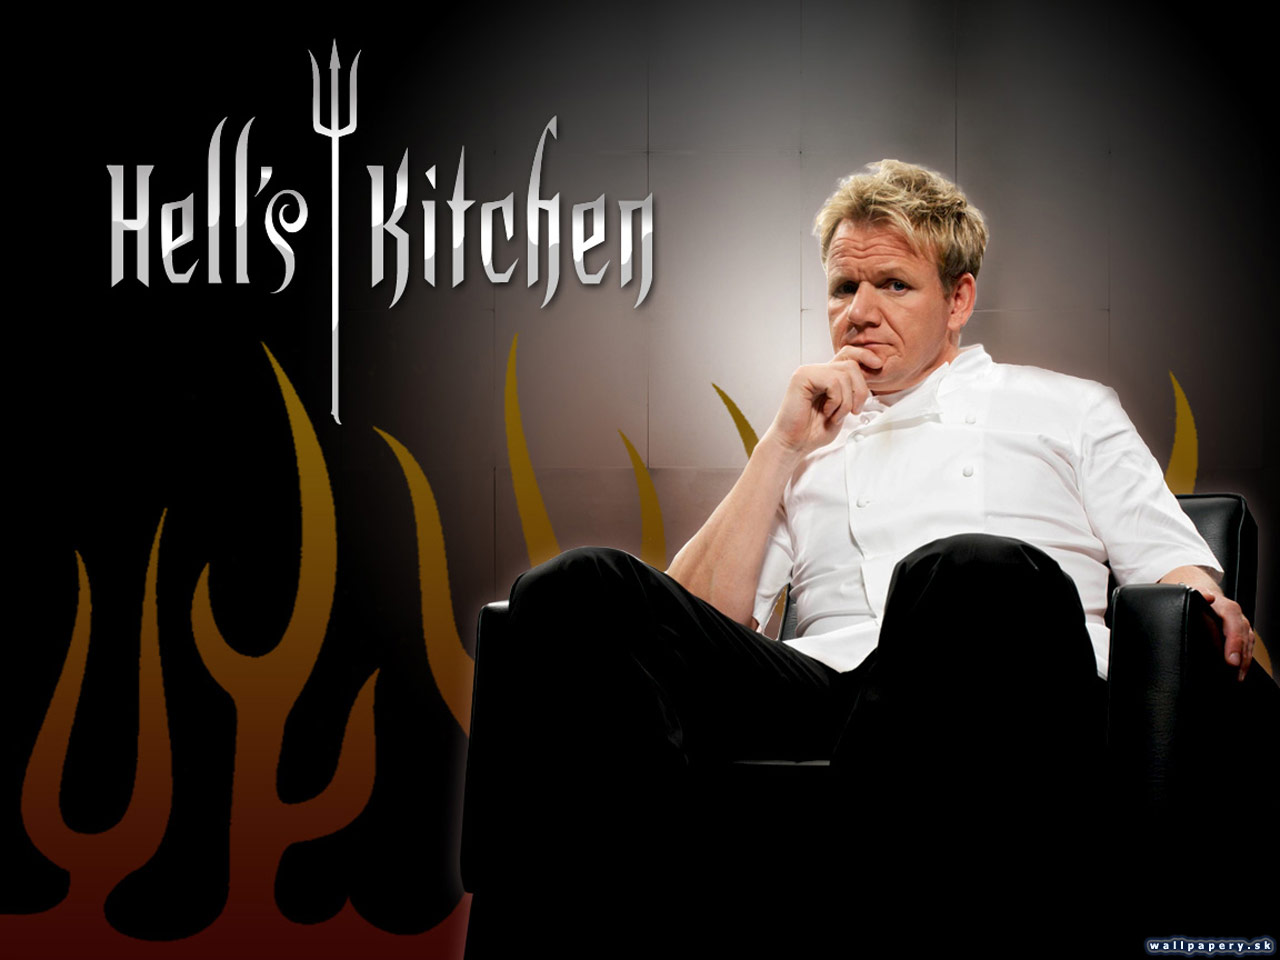 Hells Kitchen: The Video Game - wallpaper 5